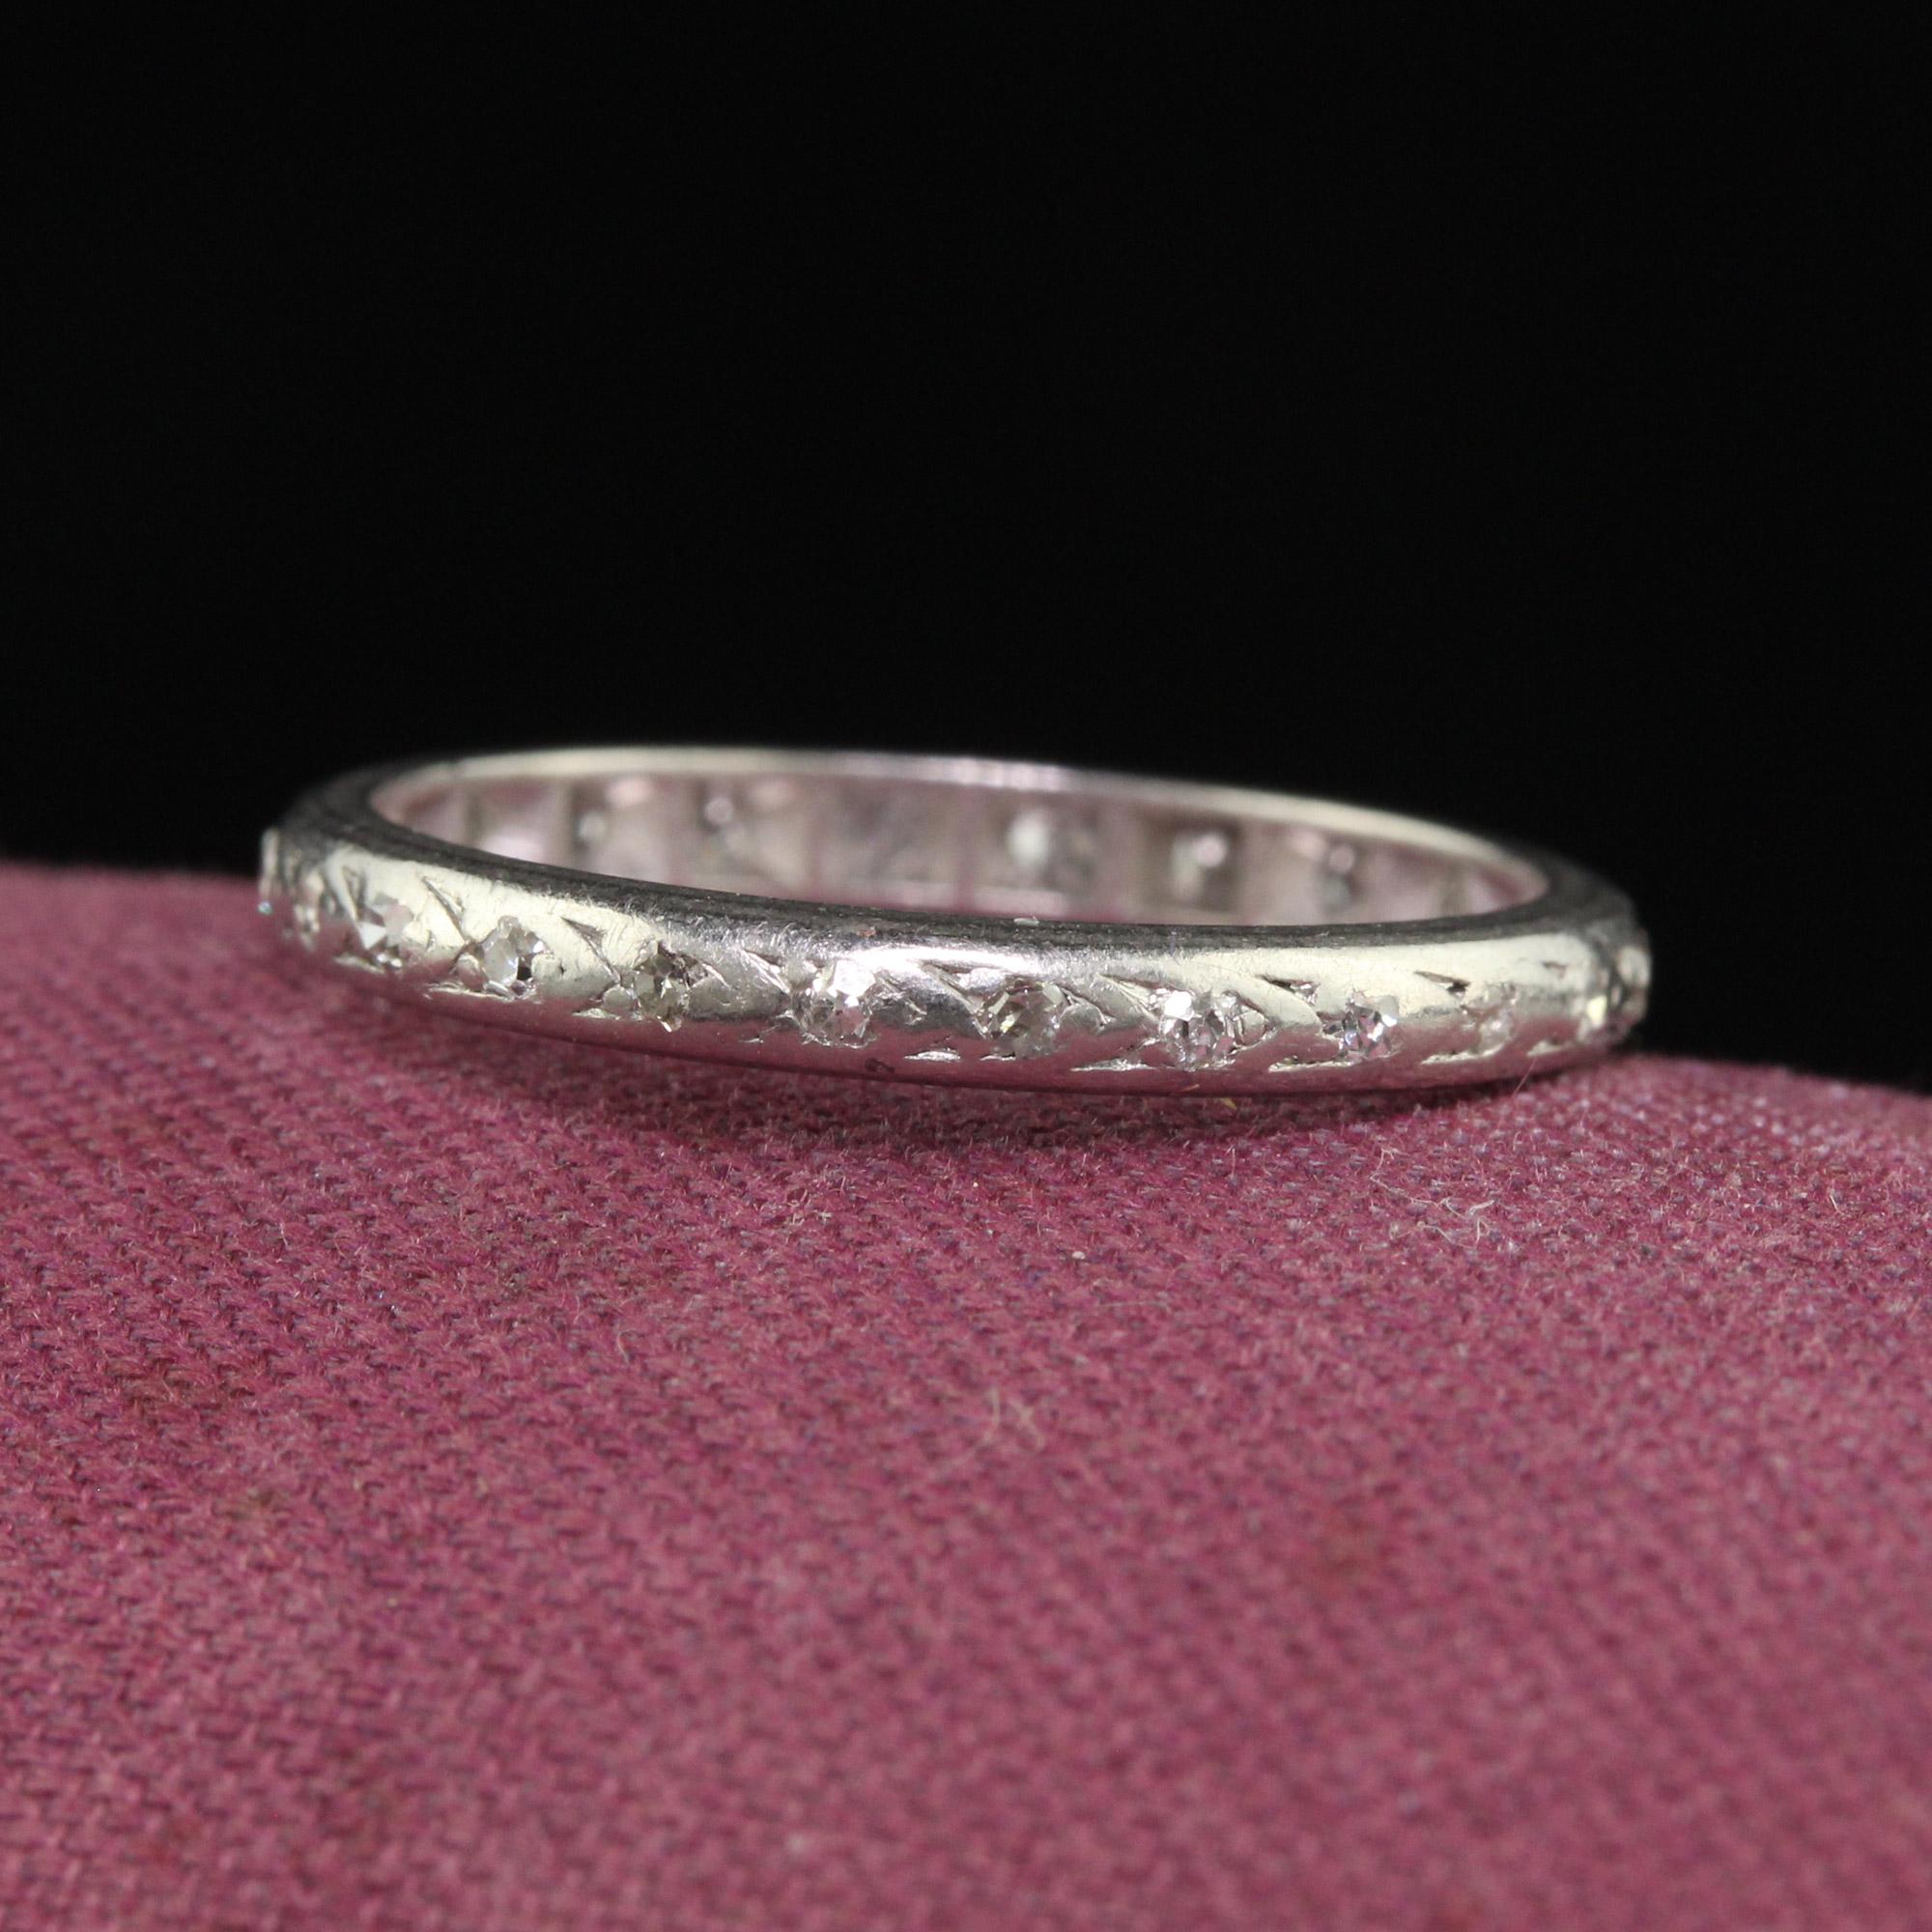 Beautiful Antique Art Deco Platinum Single Cut Diamond Engraved Eternity Band - Size 5 1/2. This beautiful wedding band is crafted in platinum. The ring has deep set single cut diamonds that go around the entire ring. The ring is in fair condition